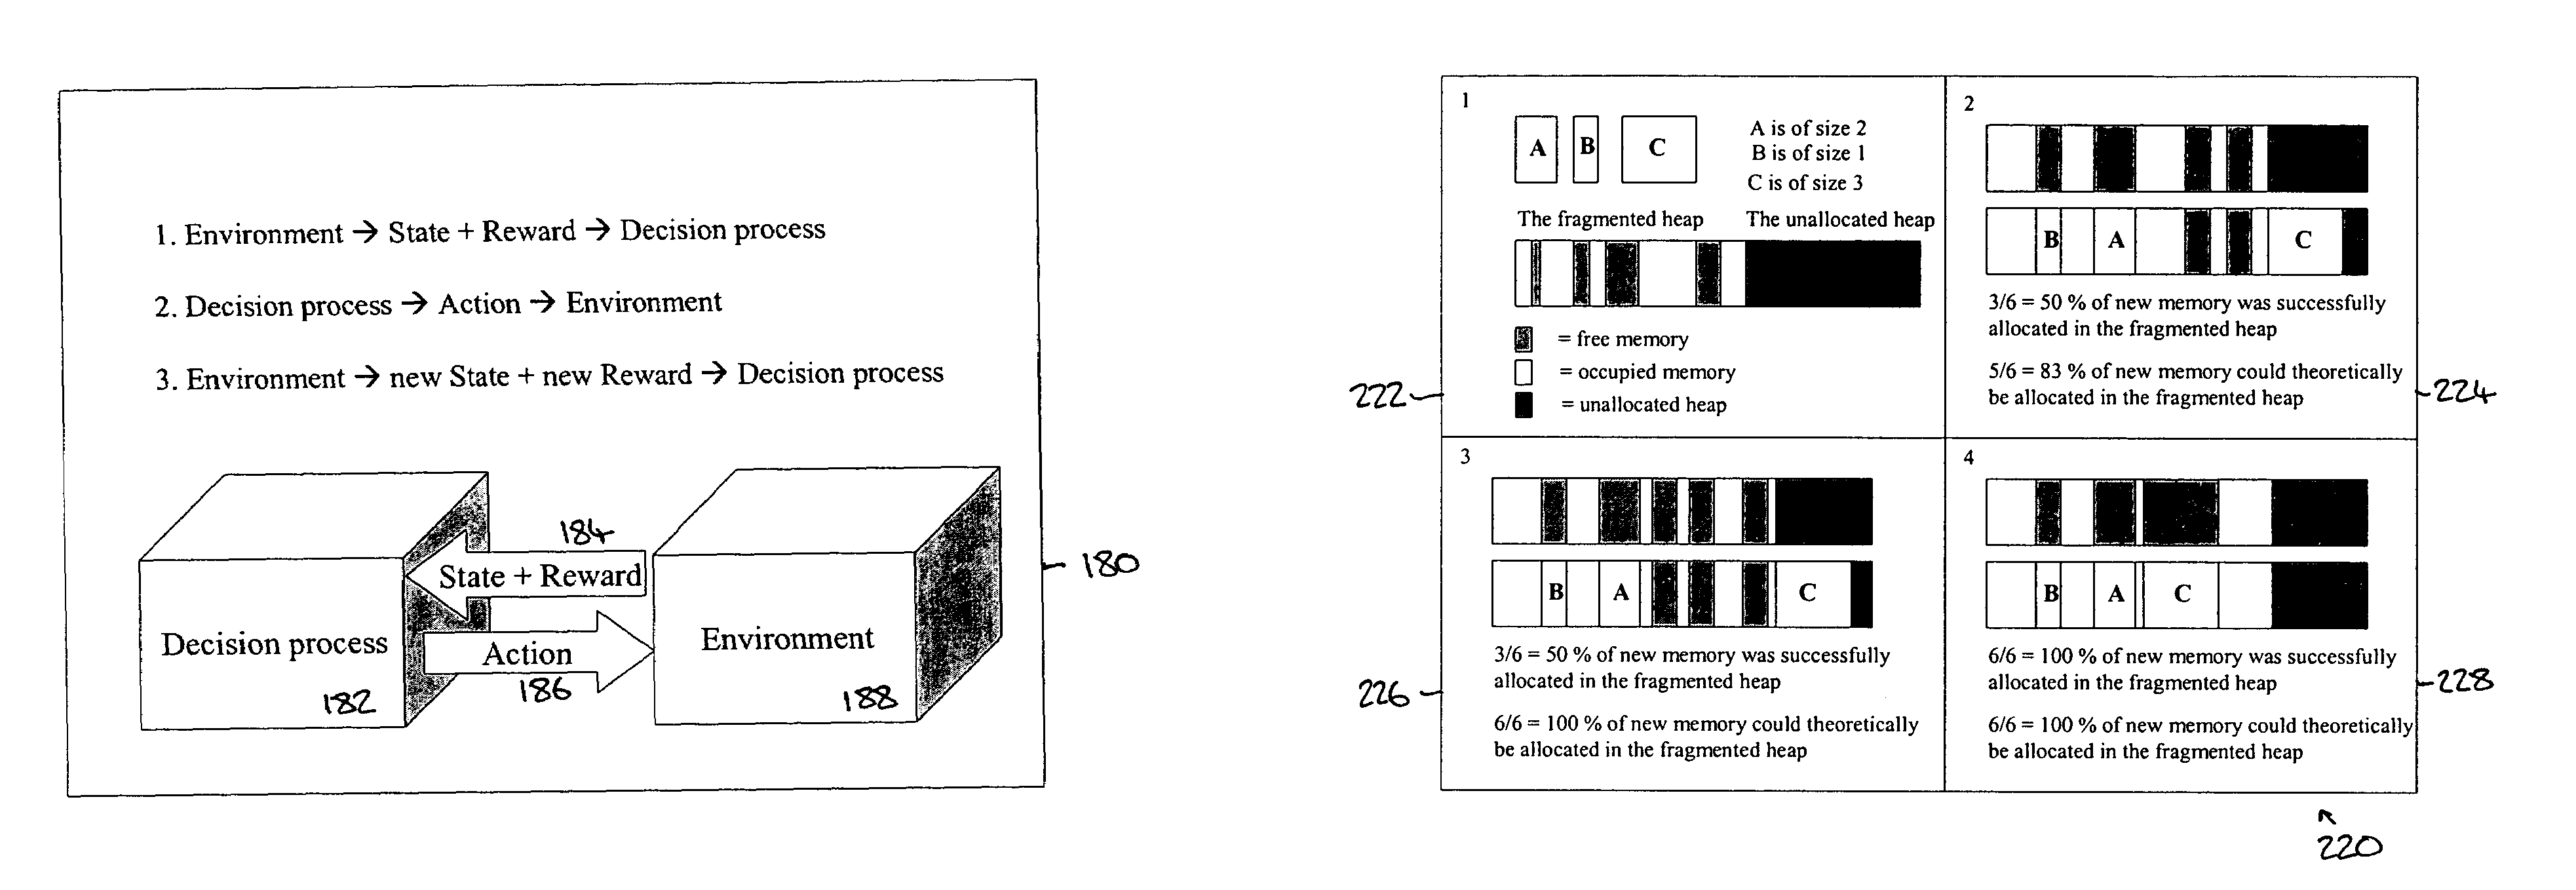 System and method for garbage collection in a computer system, which uses reinforcement learning to adjust the allocation of memory space, calculate a reward, and use the reward to determine further actions to be taken on the memory space